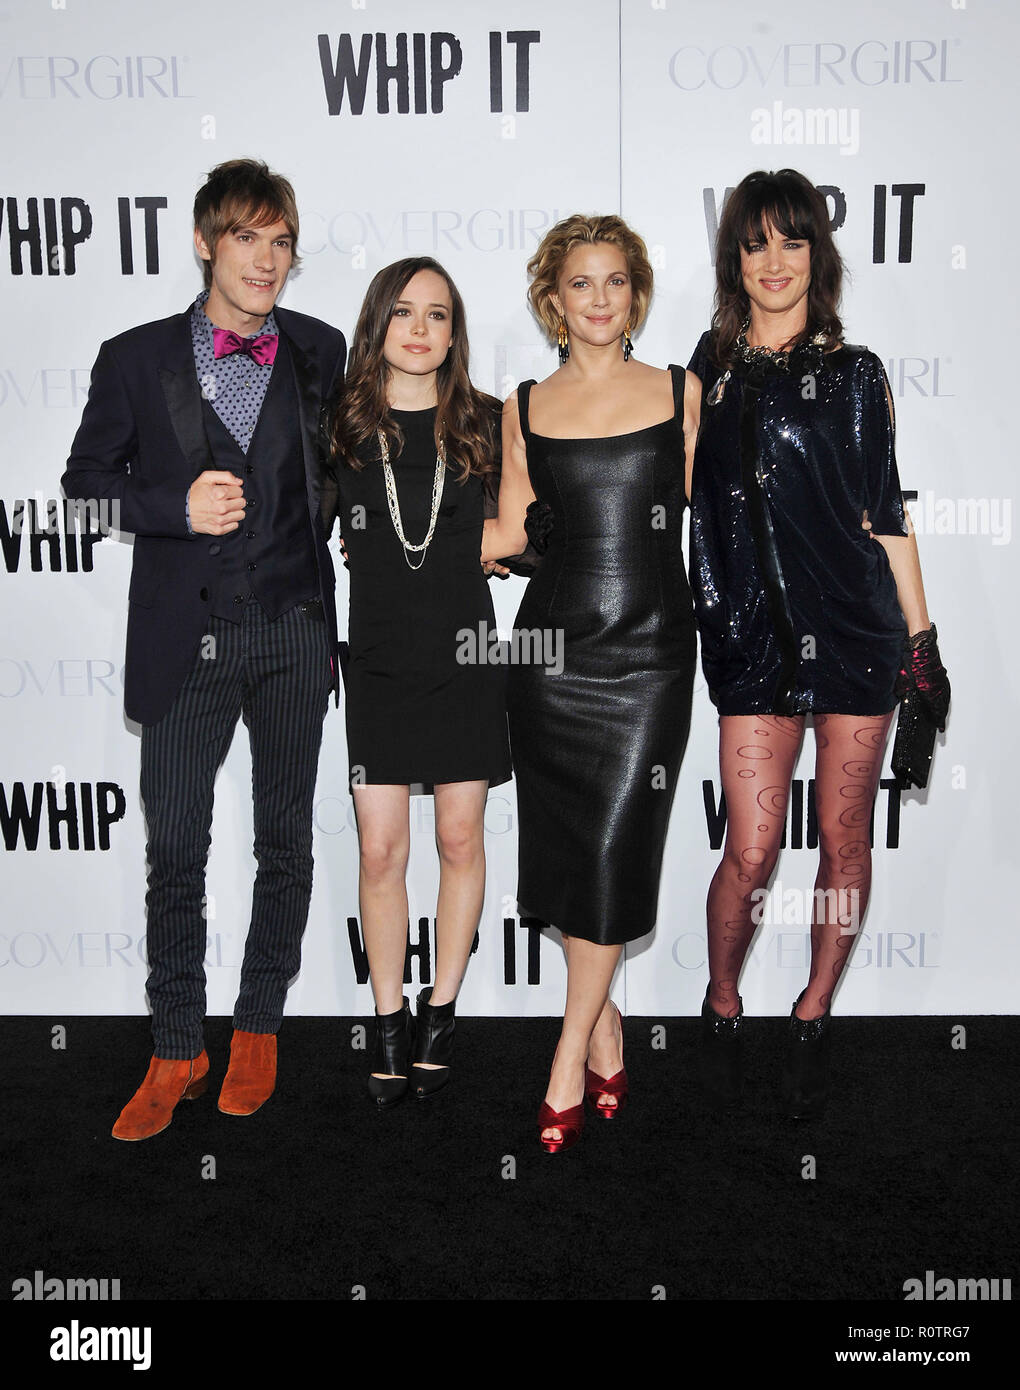 Landon Pigg , Ellen Page  Drew Barrymore and  Juliette Lewis  - Whip It Premiere at the Chinese Theatre In Los Angeles.          -            PiggL Pa Stock Photo